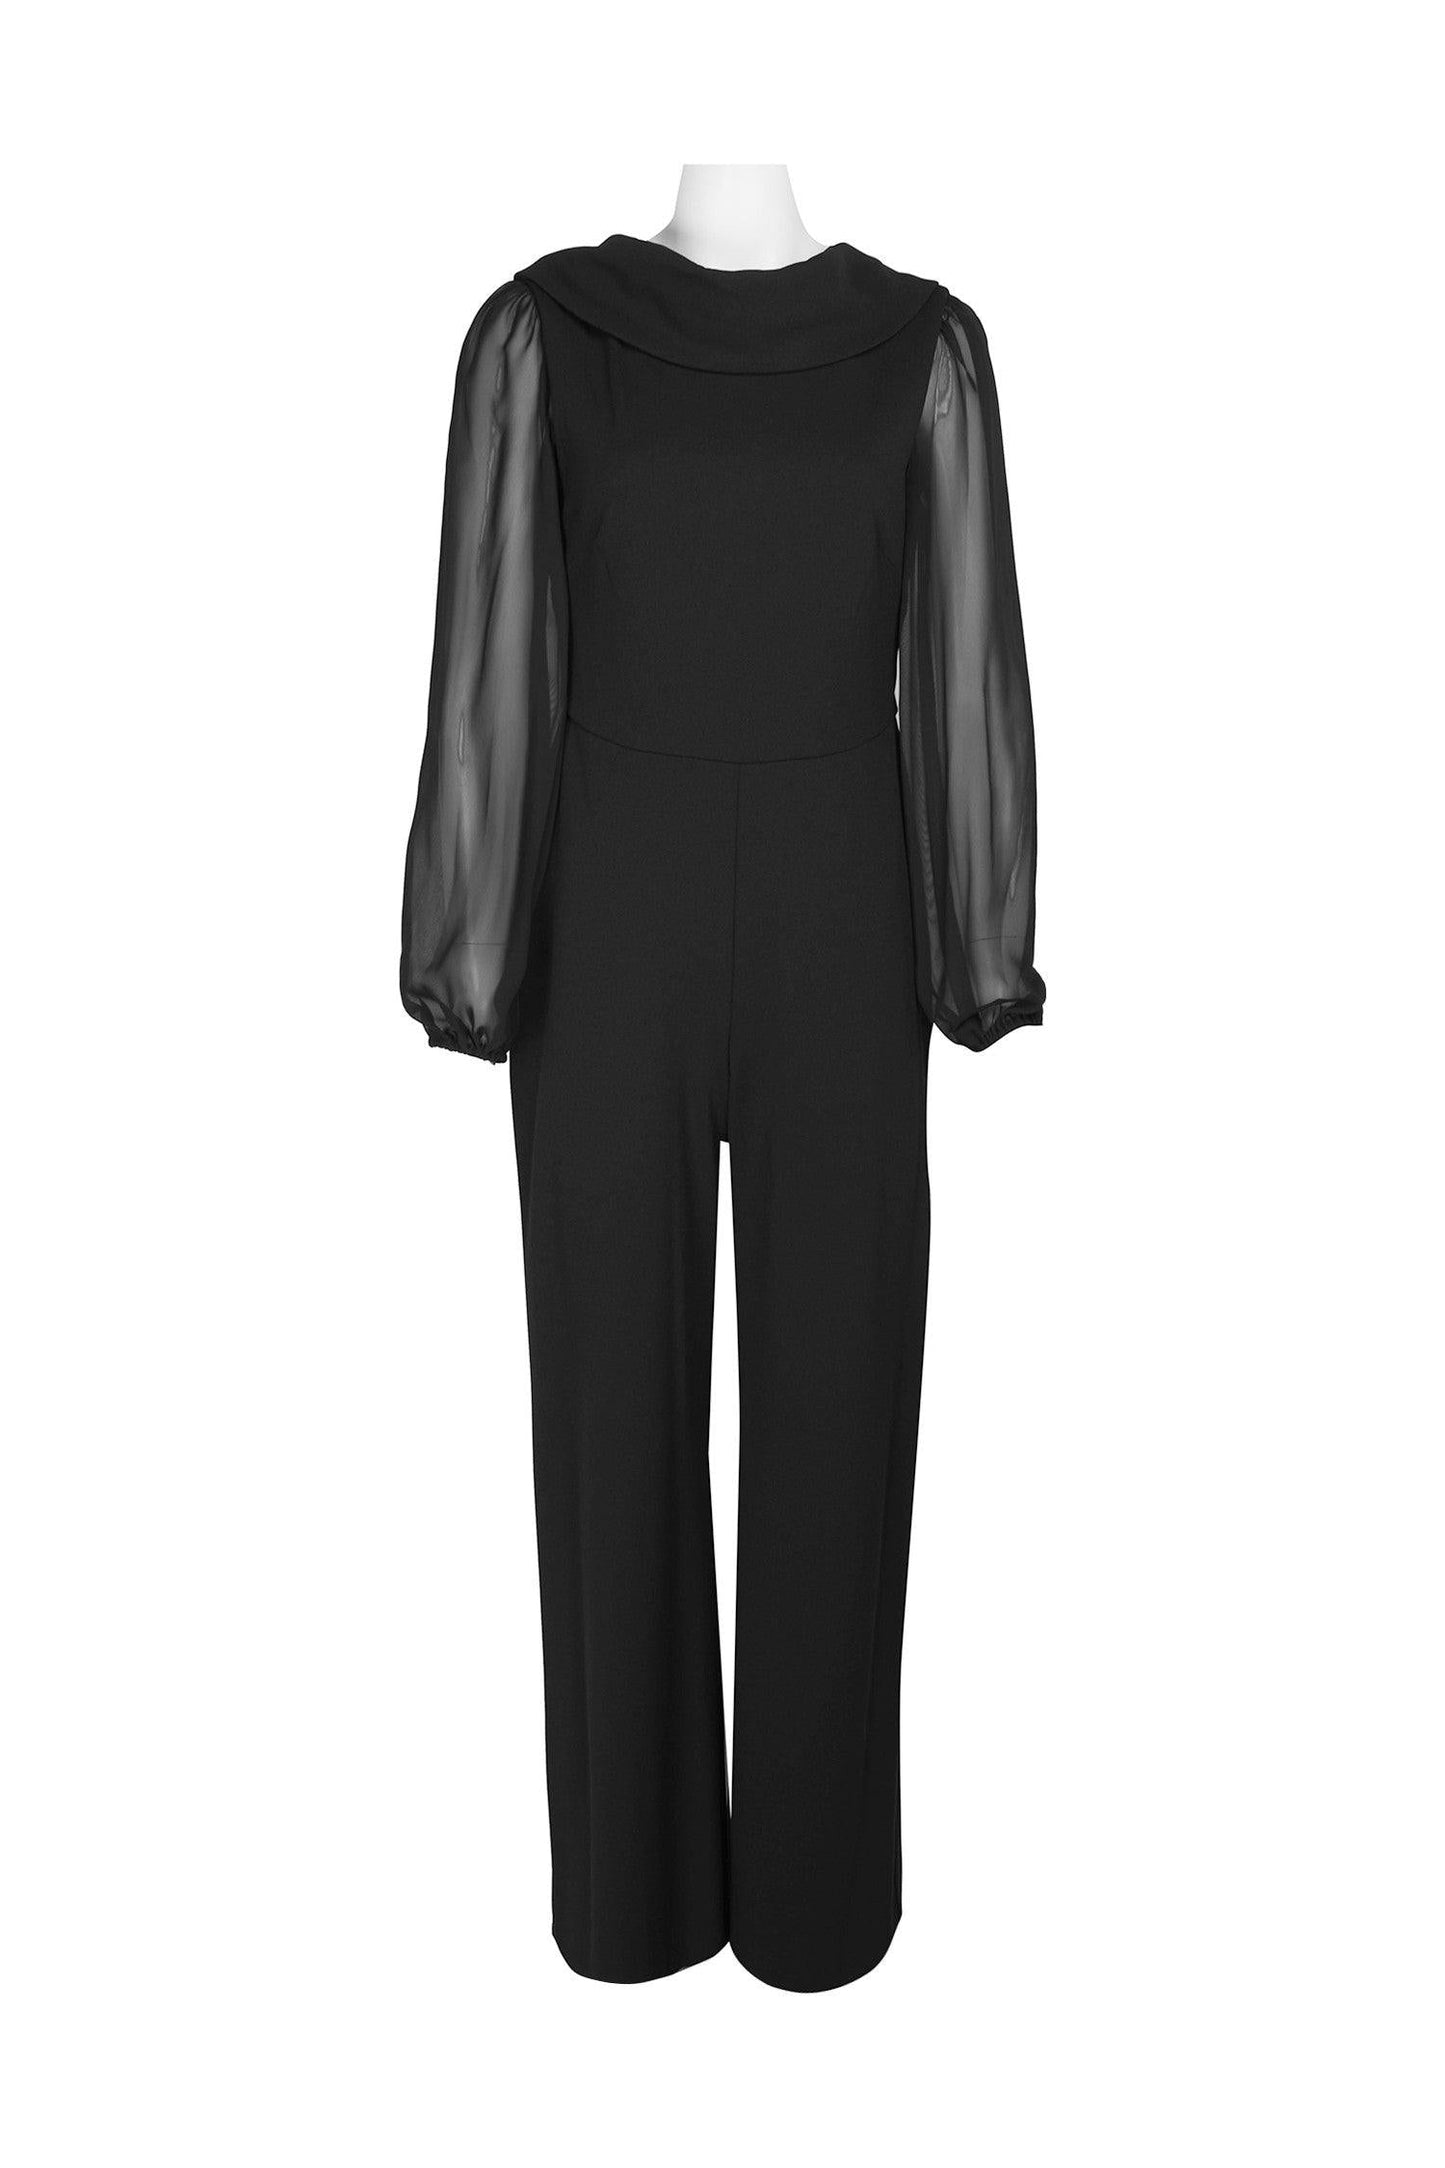 Connected Apparel Long Sleeve Formal Jumpsuit - The Dress Outlet